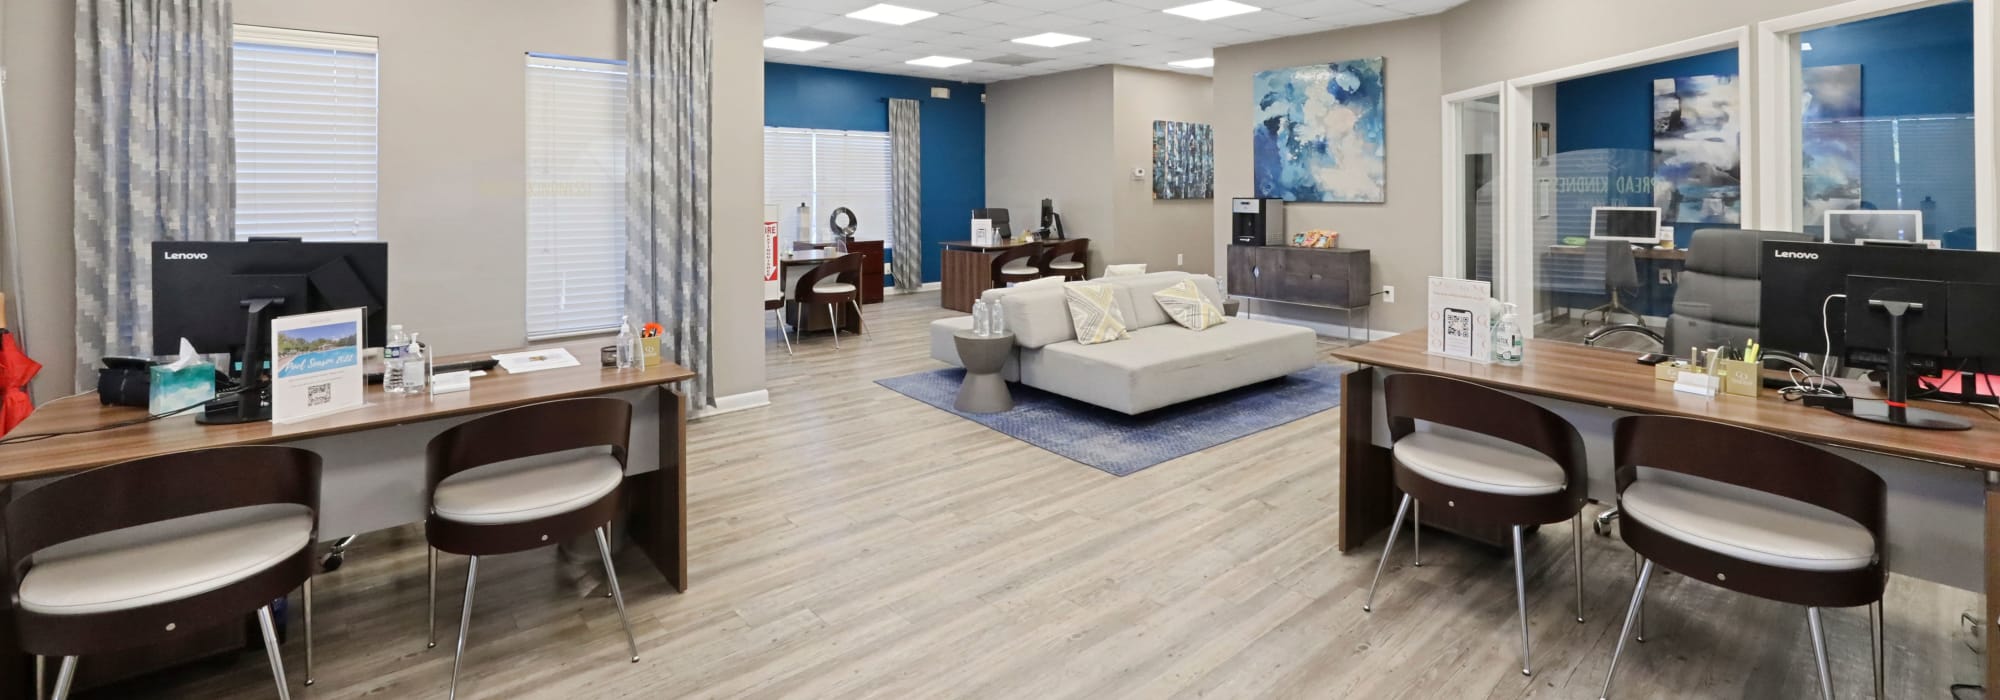 Schedule a Tour at The Seasons Apartments in Laurel, Maryland